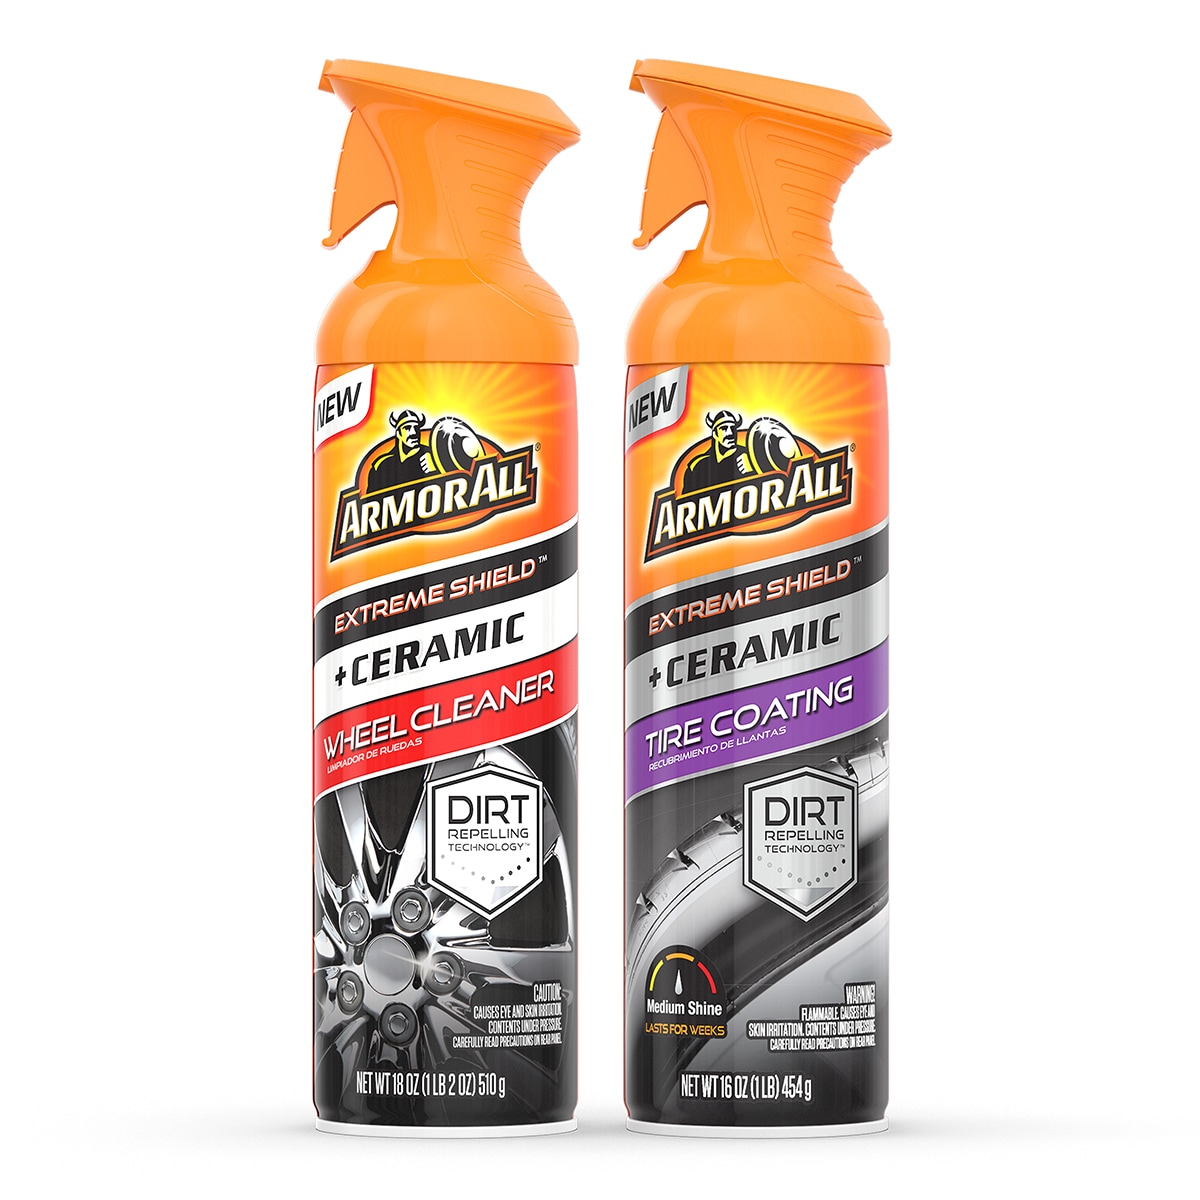 Armor All Extreme Bug and Tar Remover, Car Bug Remover with Wax Protection, 16 fl oz